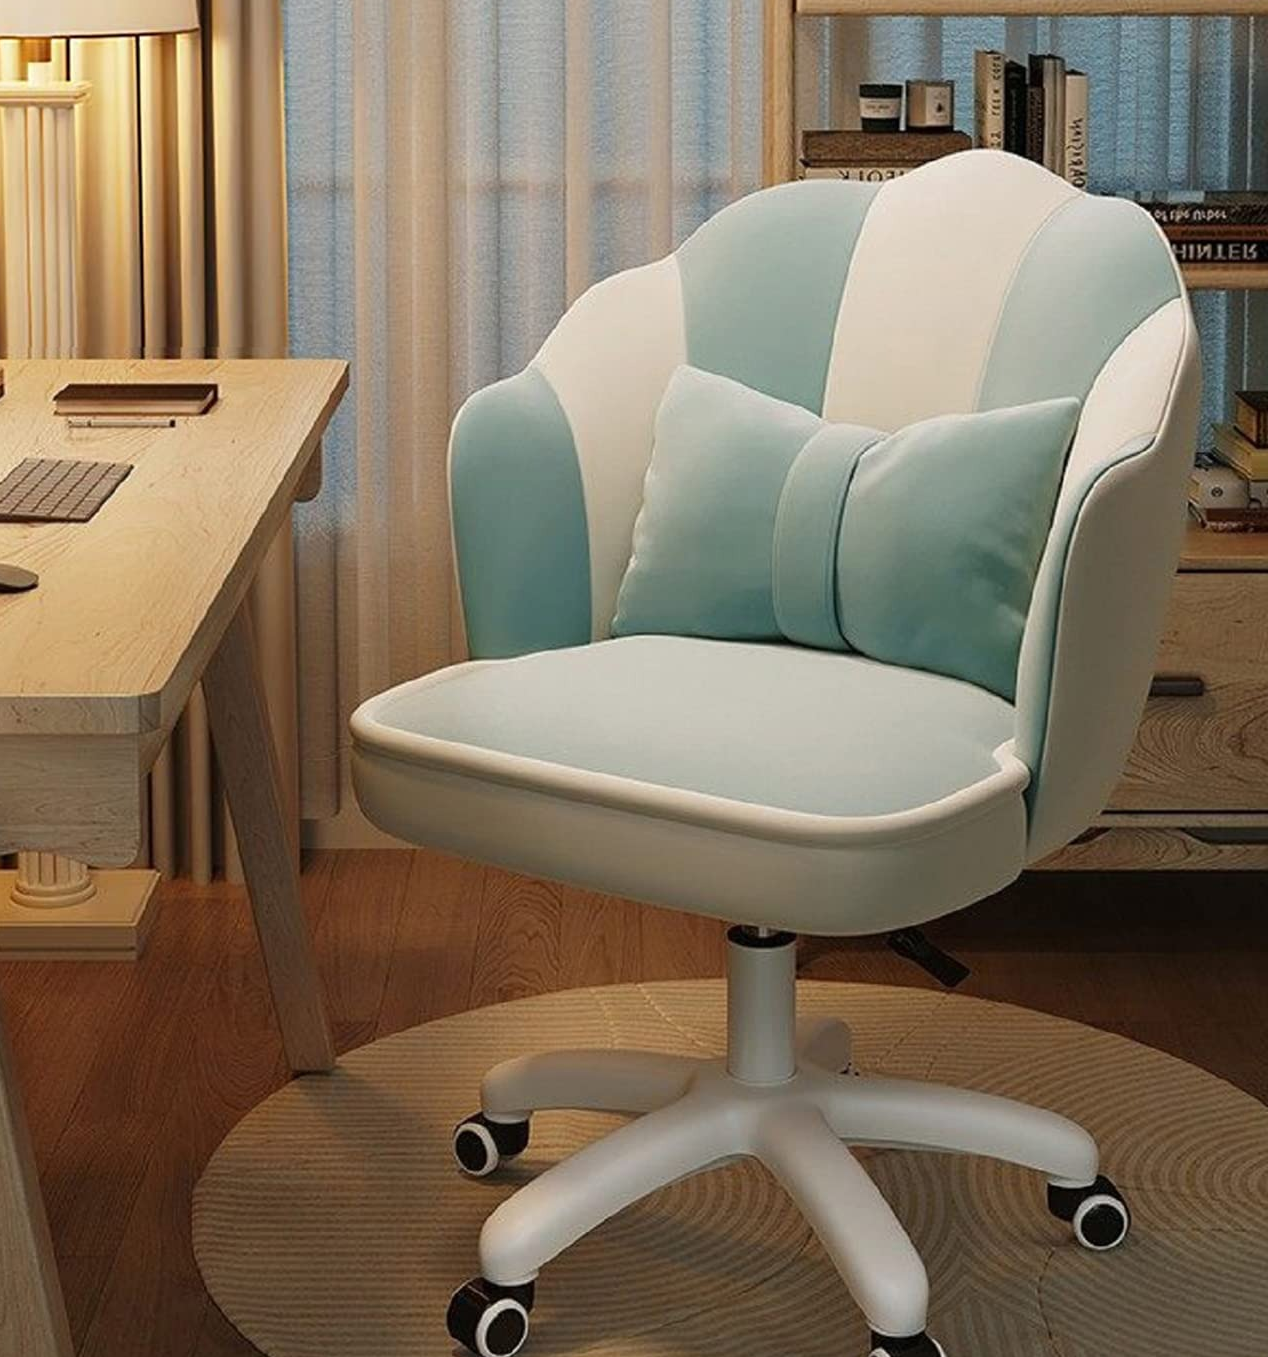 19 Cute Desk Chairs To Upgrade Your Office